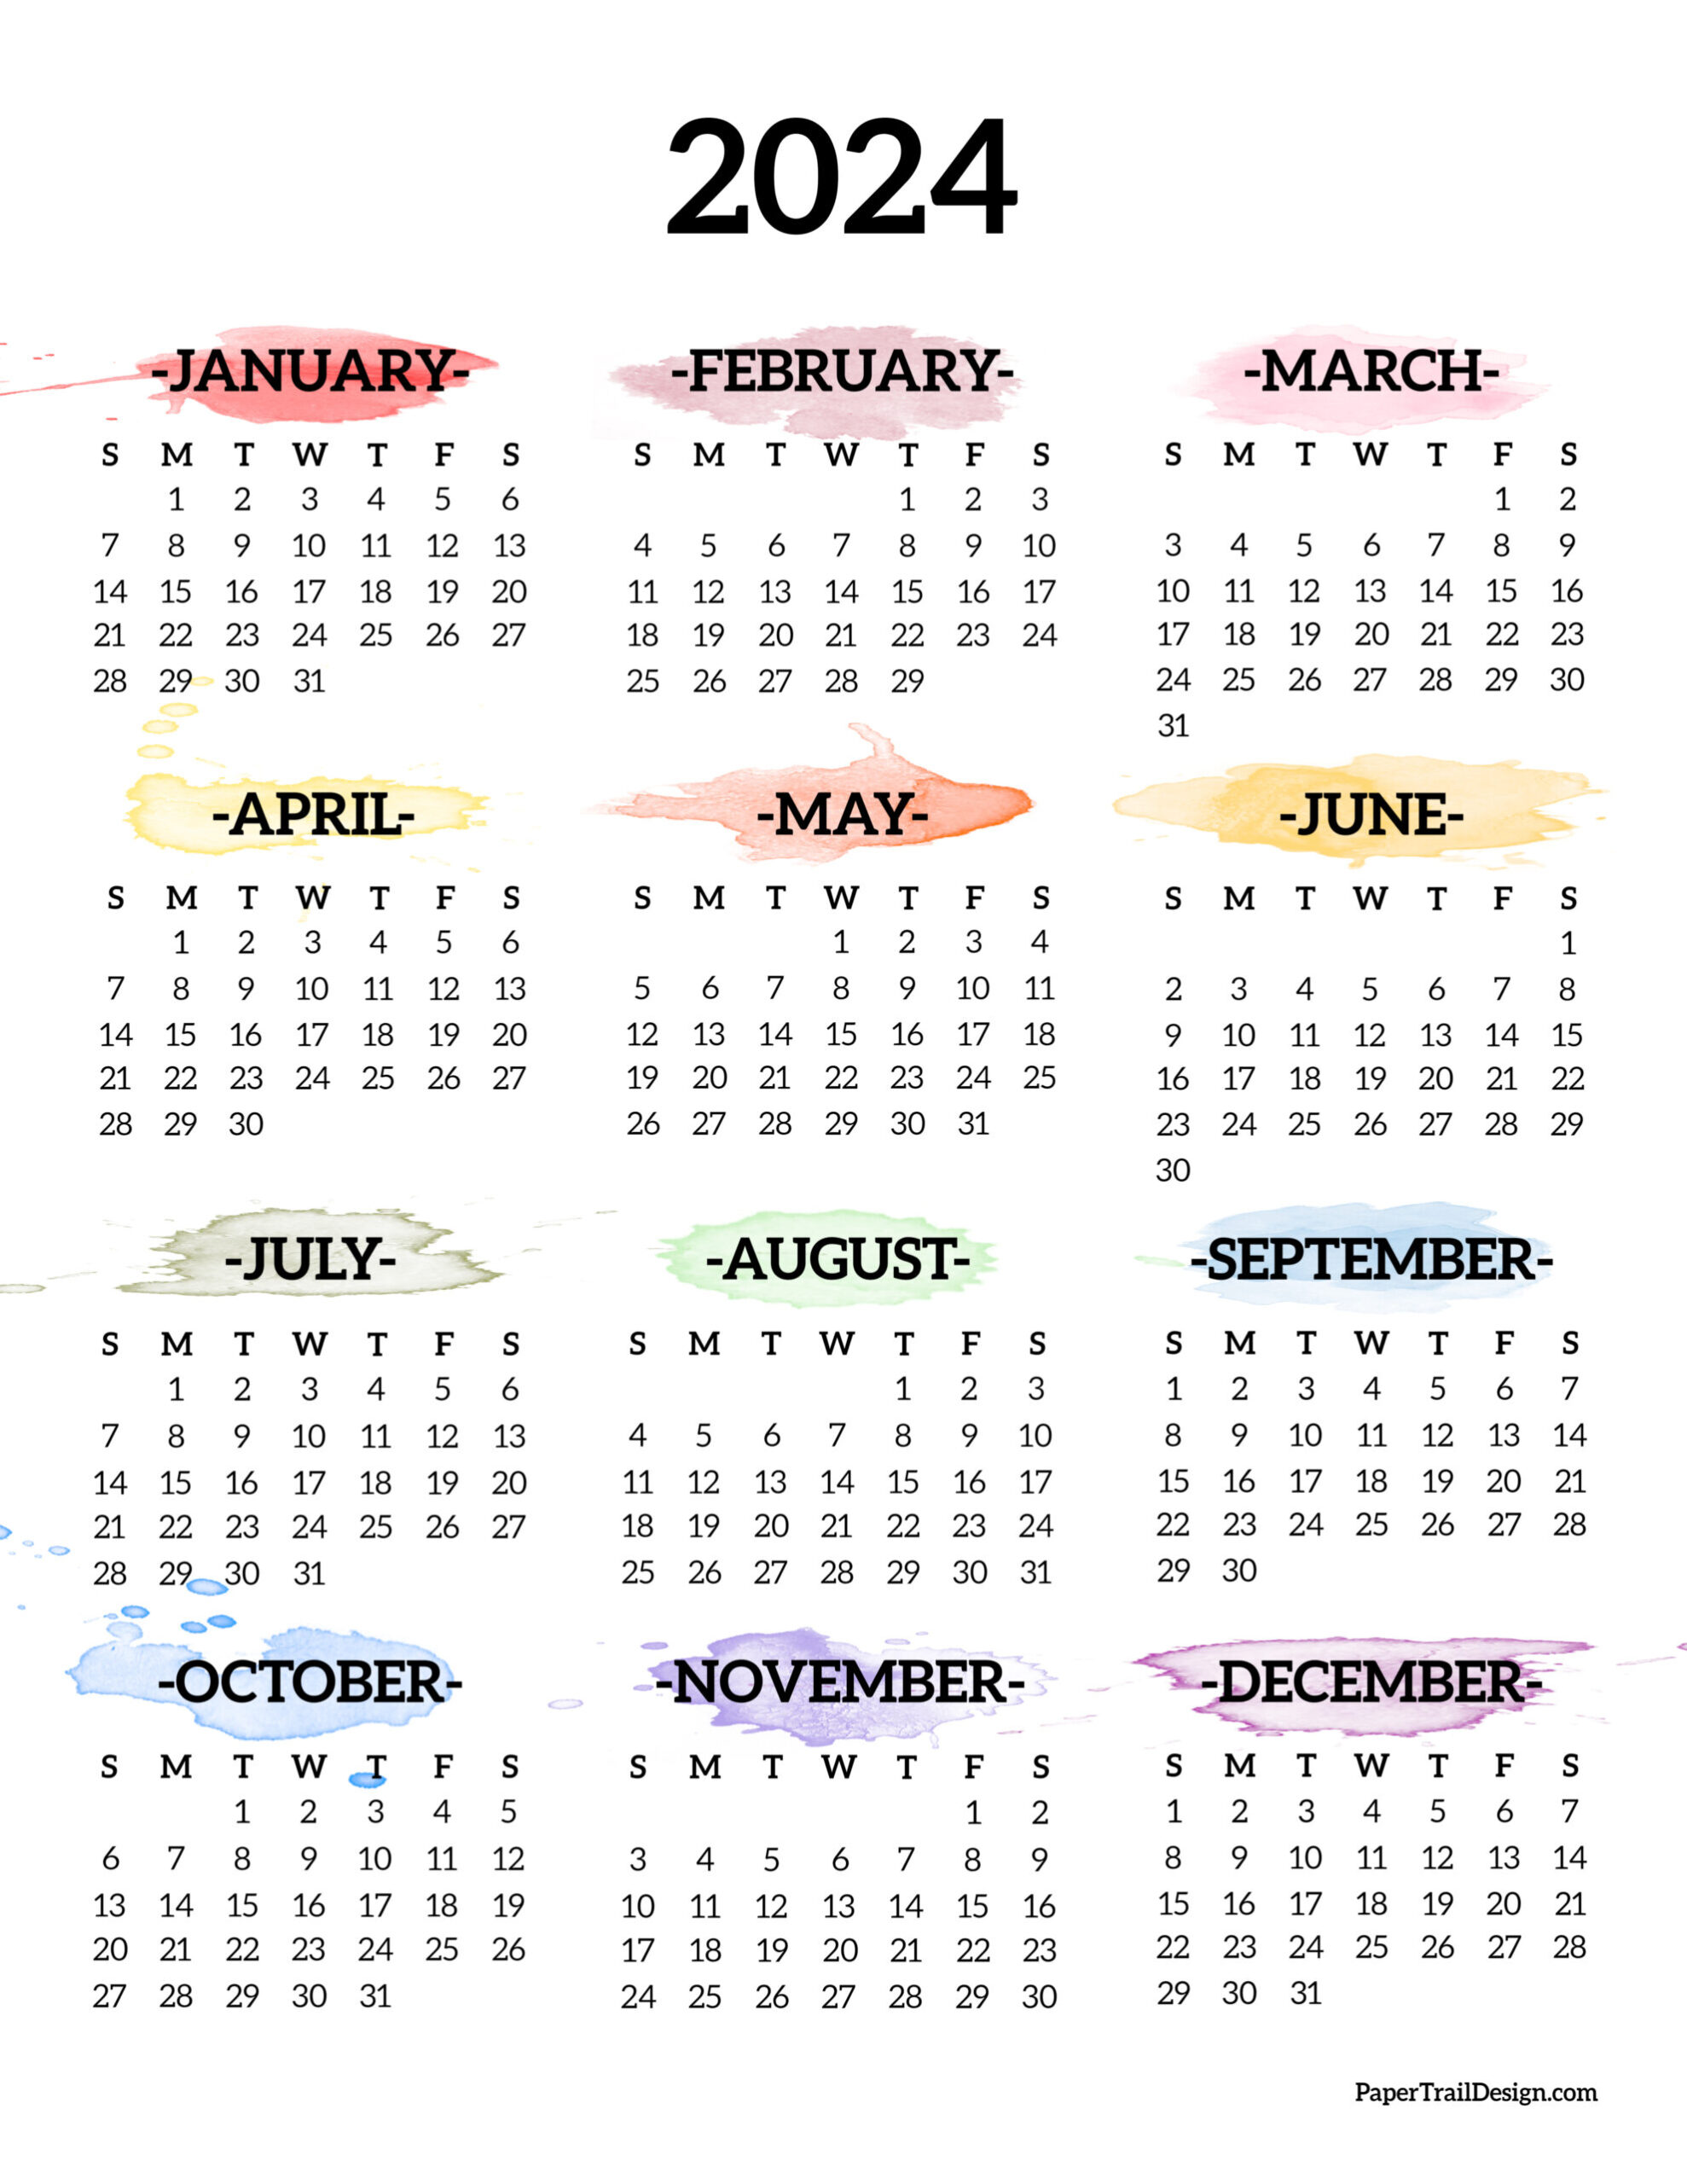 Calendar 2024 Printable One Page - Paper Trail Design for 2024 One Page Printable Calendar